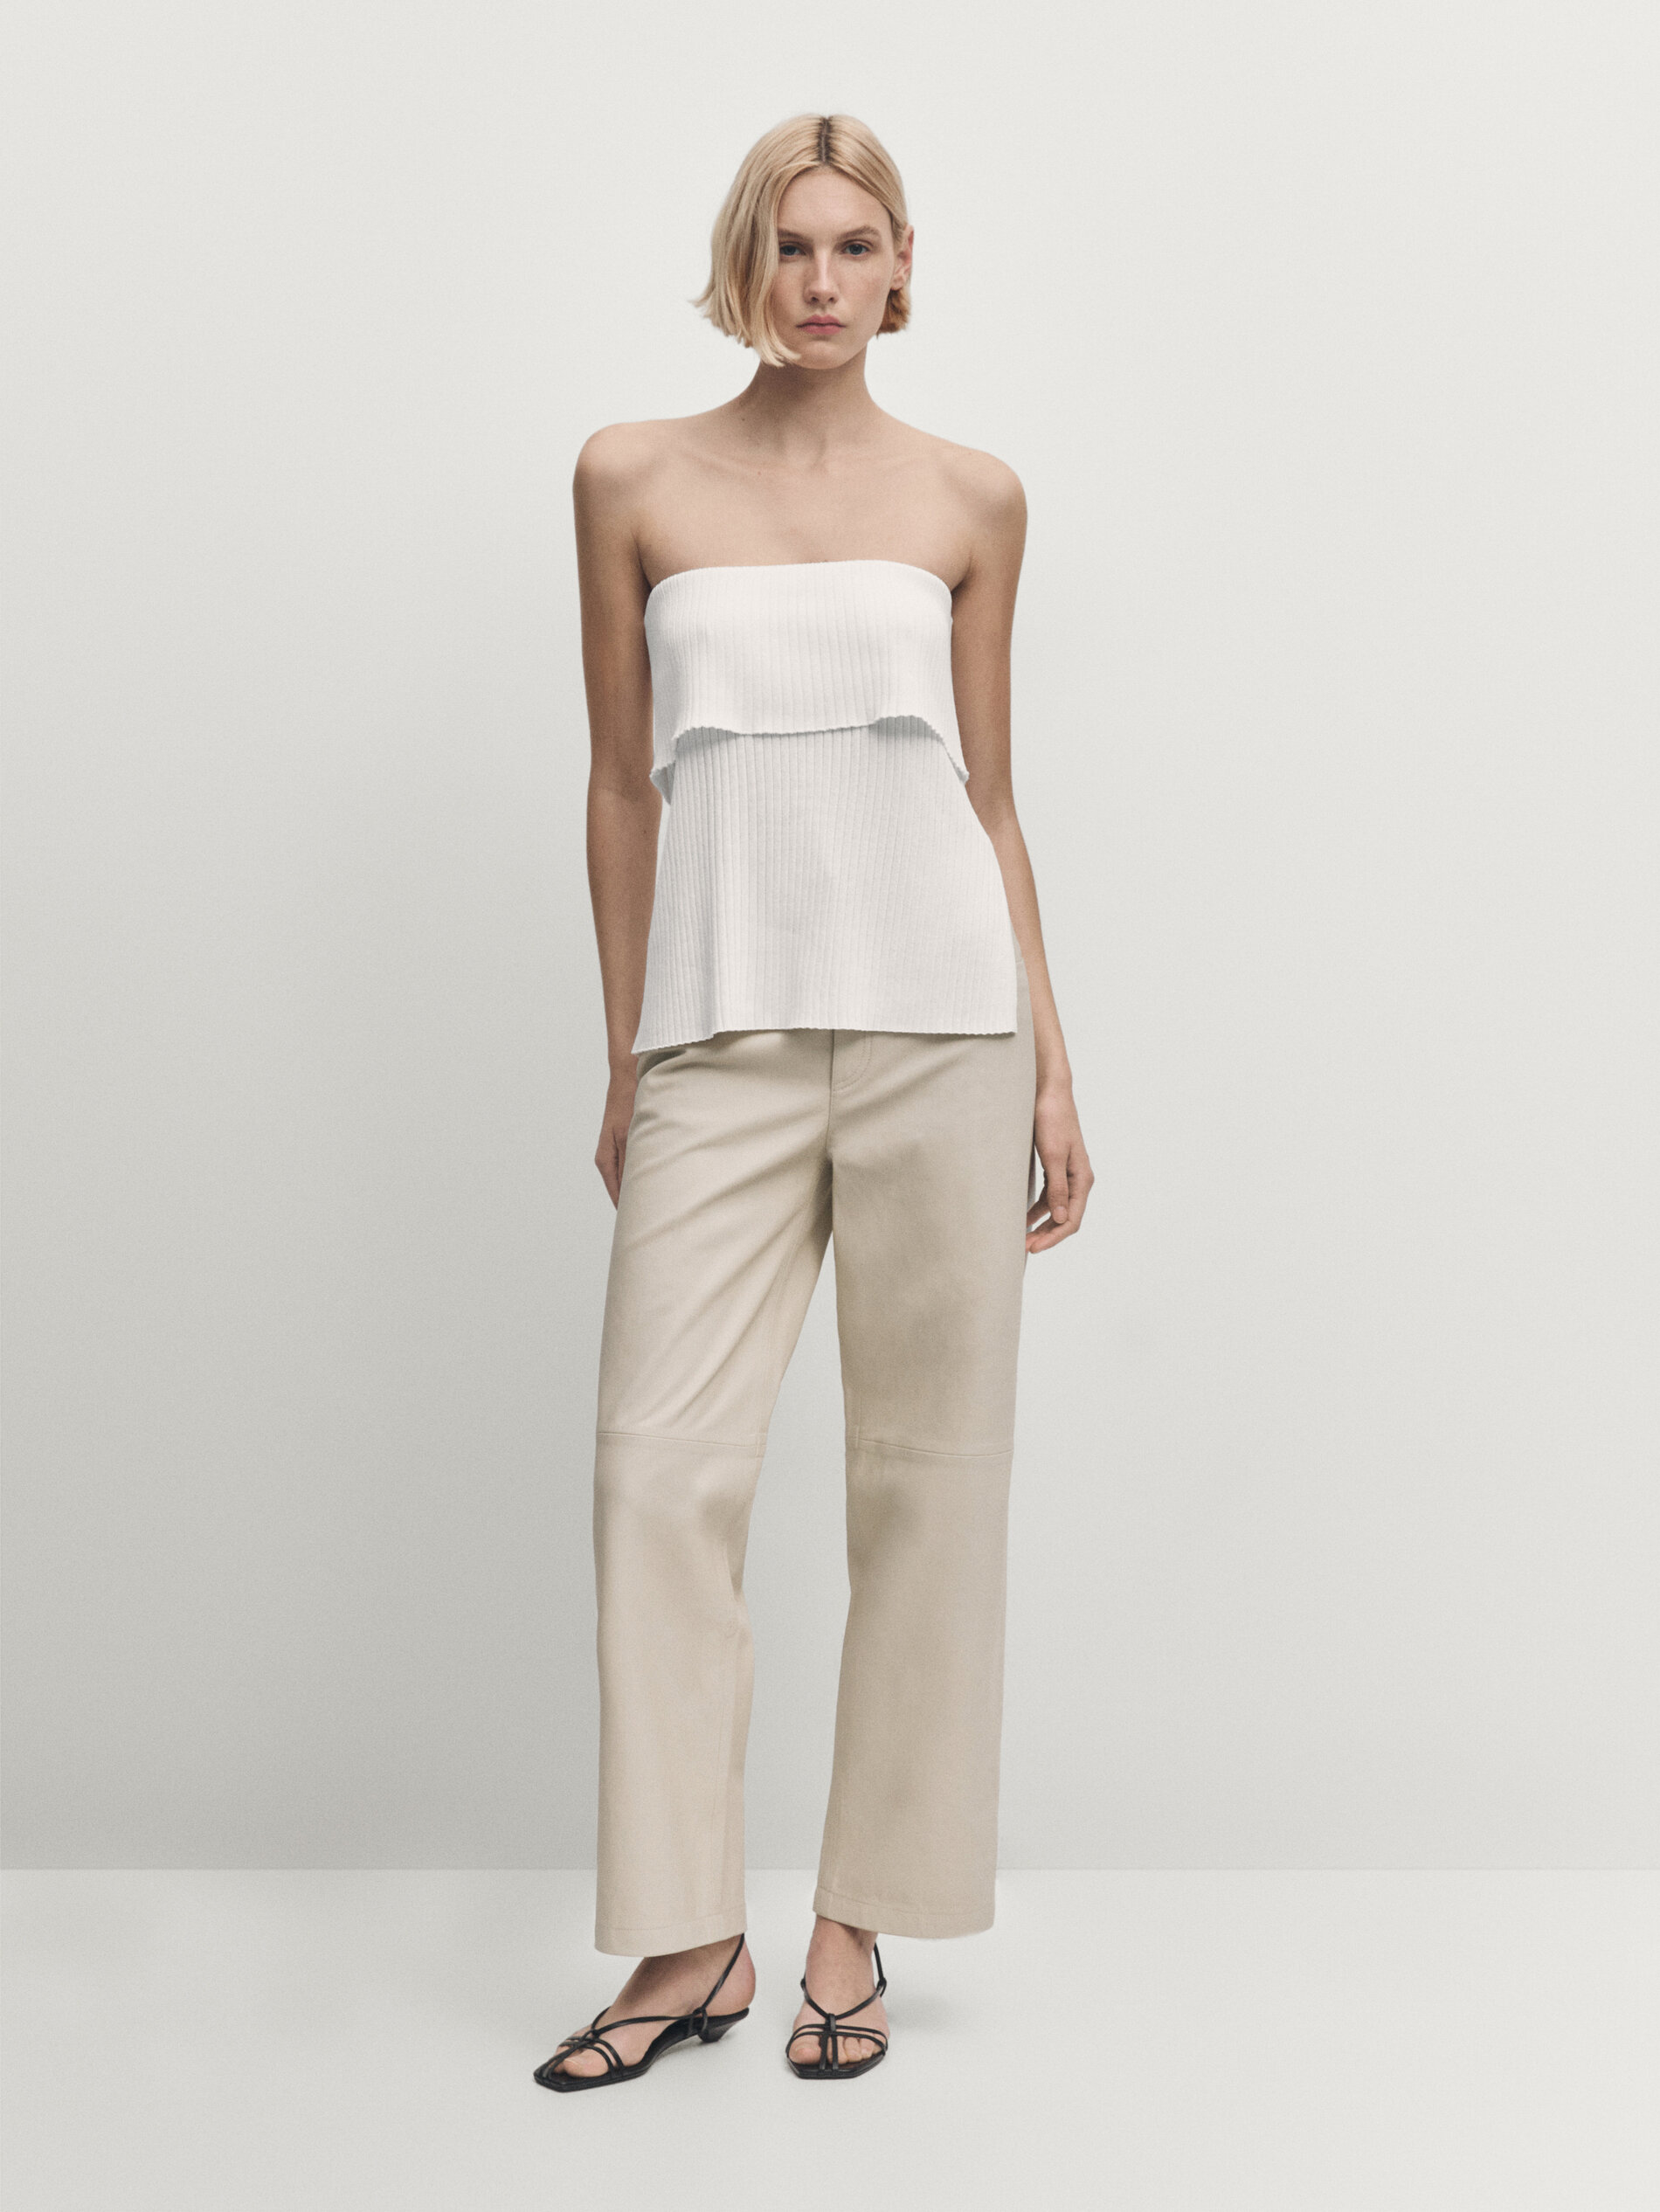 Massimo Dutti Strapless Knit Top In Weiss